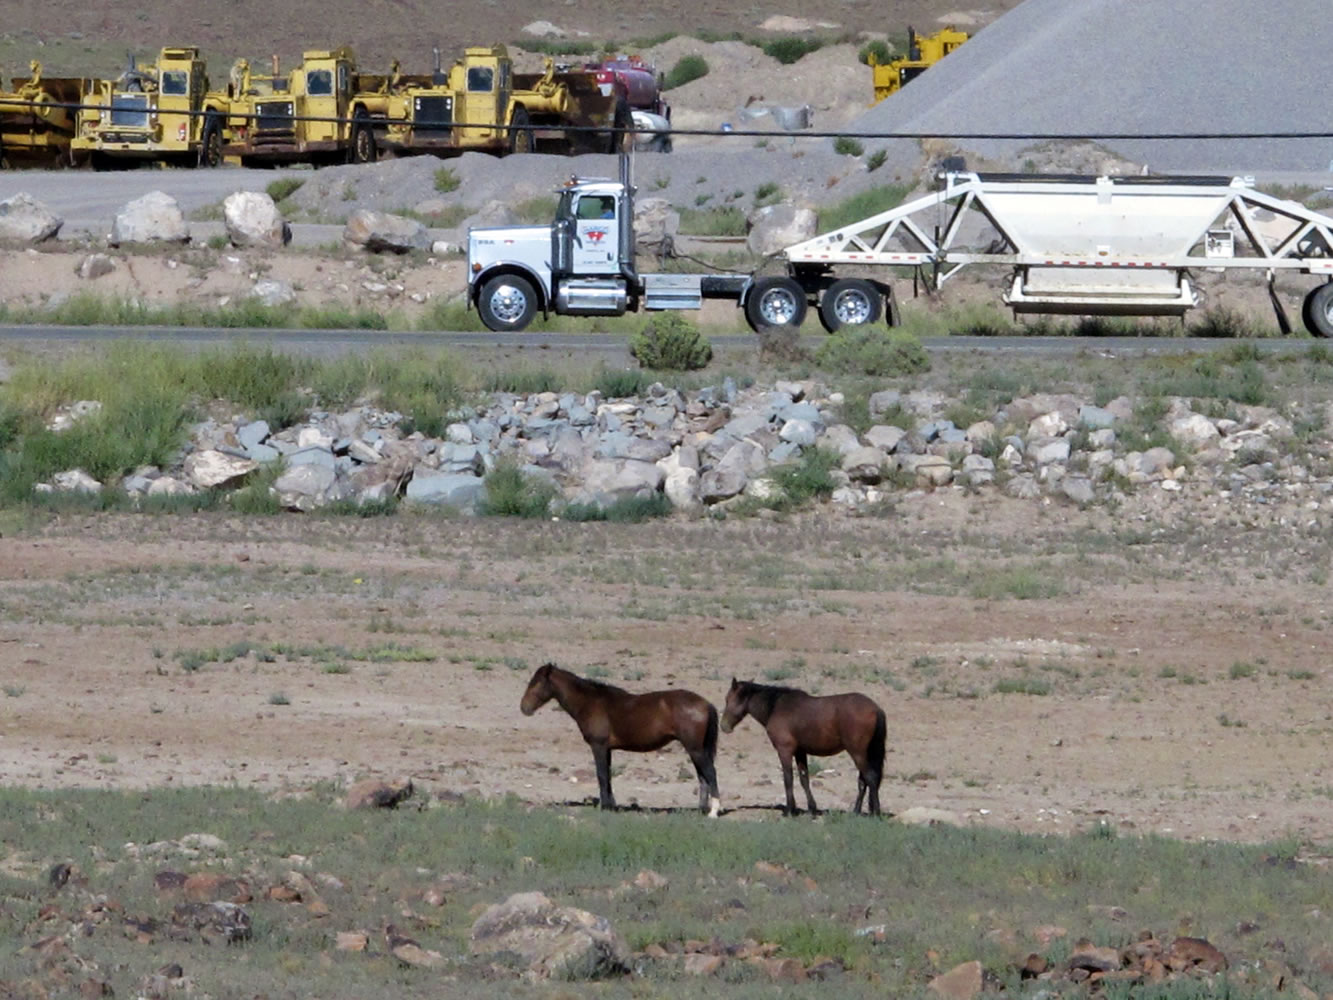 Mustangs graze Thursday at the Tahoe Reno Industrial Center 15 miles east of Sparks, Nev., where Tesla Motors Inc.